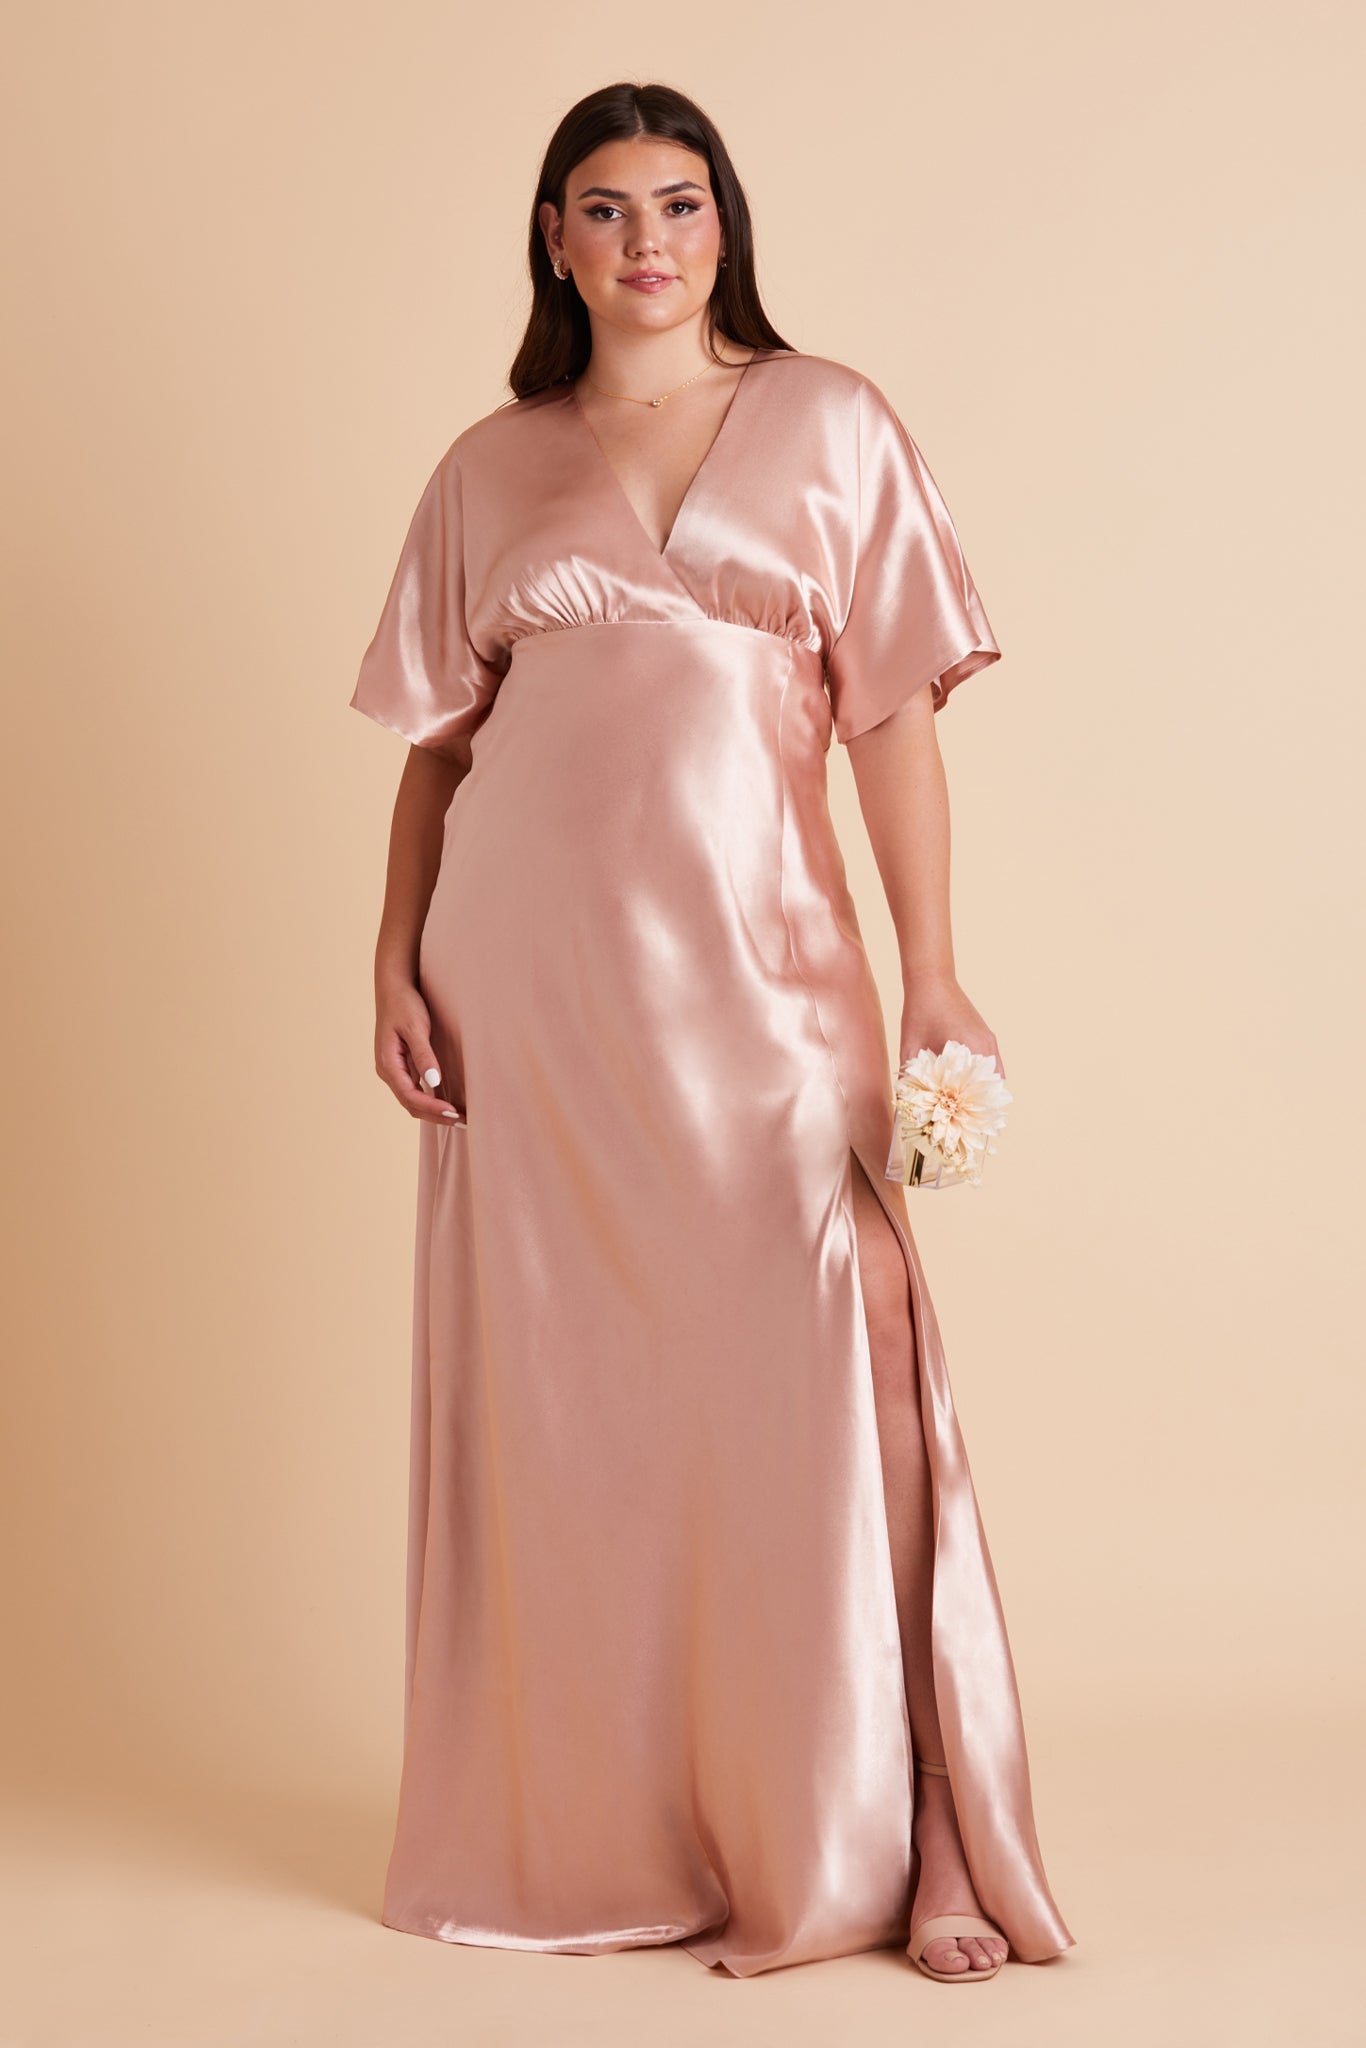 Jesse plus size bridesmaid dress in rose gold satin by Birdy Grey, front view